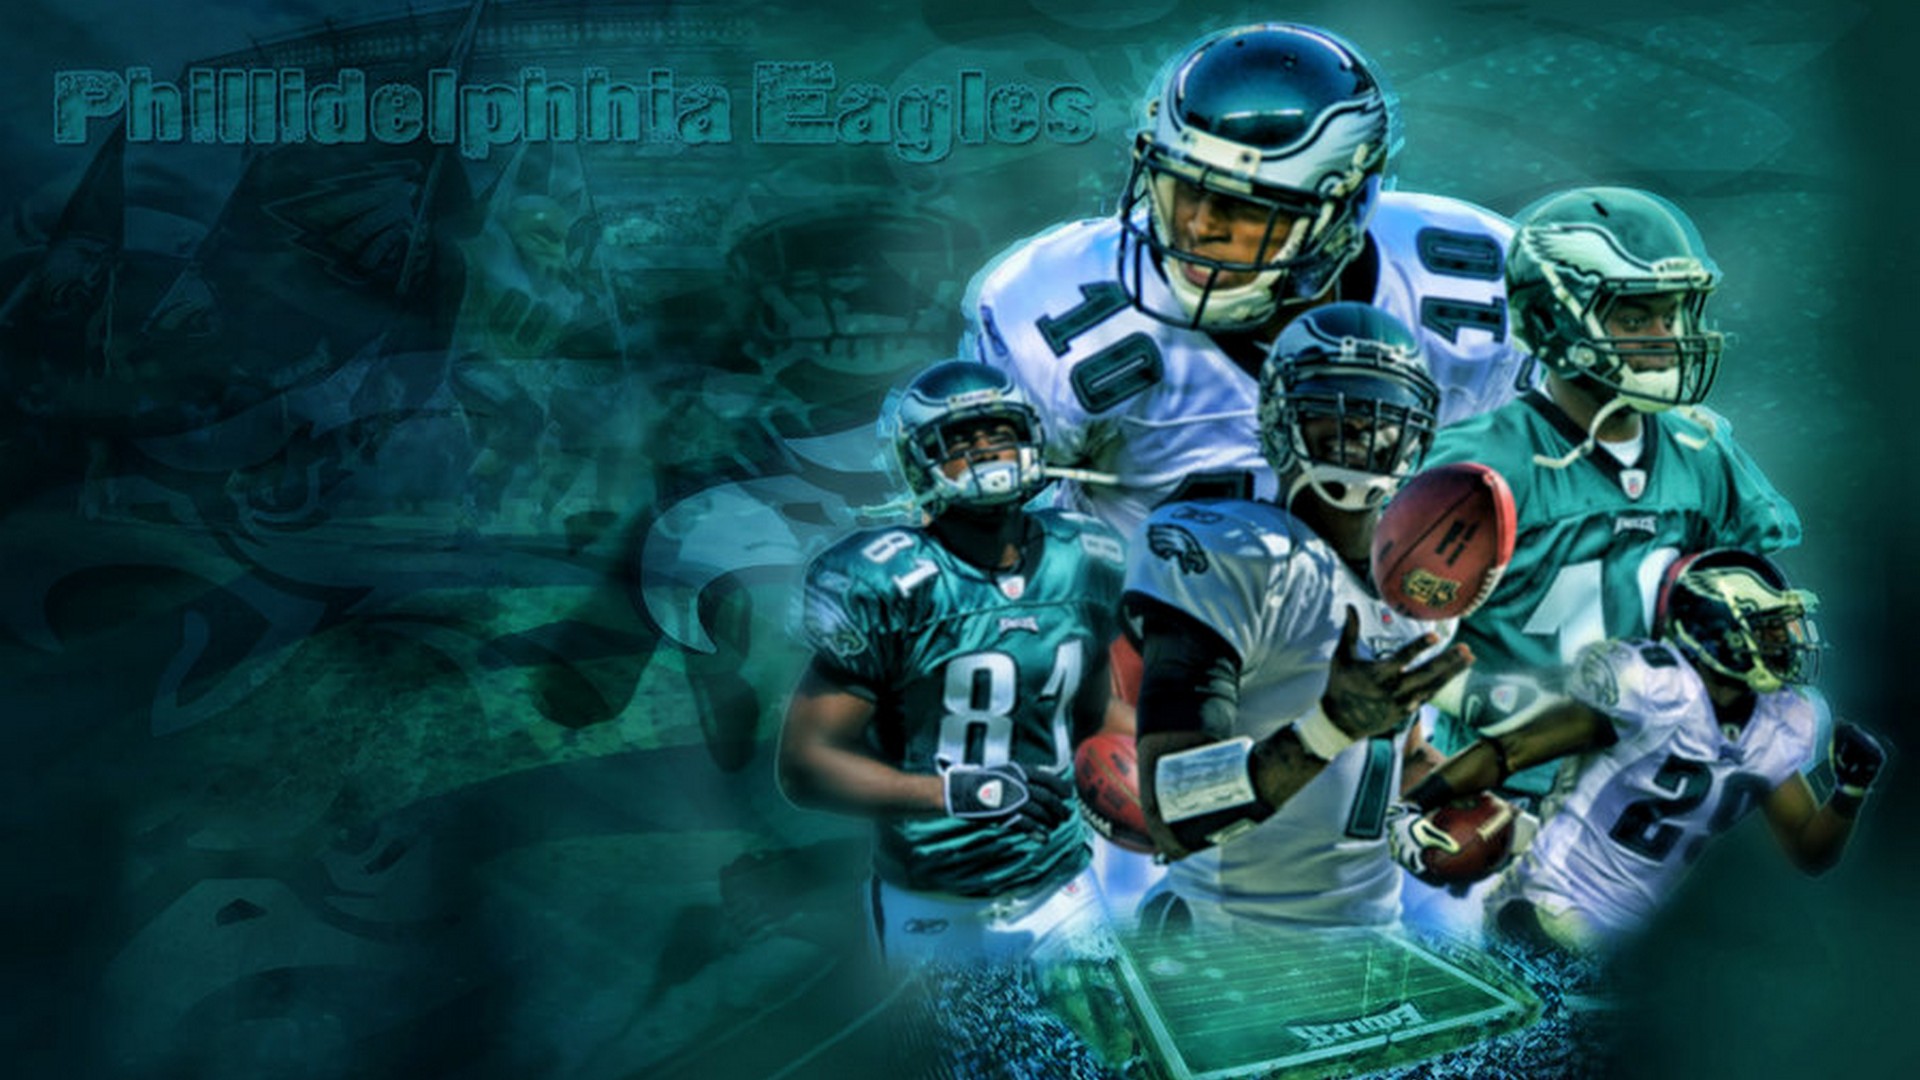 HD The Eagles Background Nfl Football Wallpaper